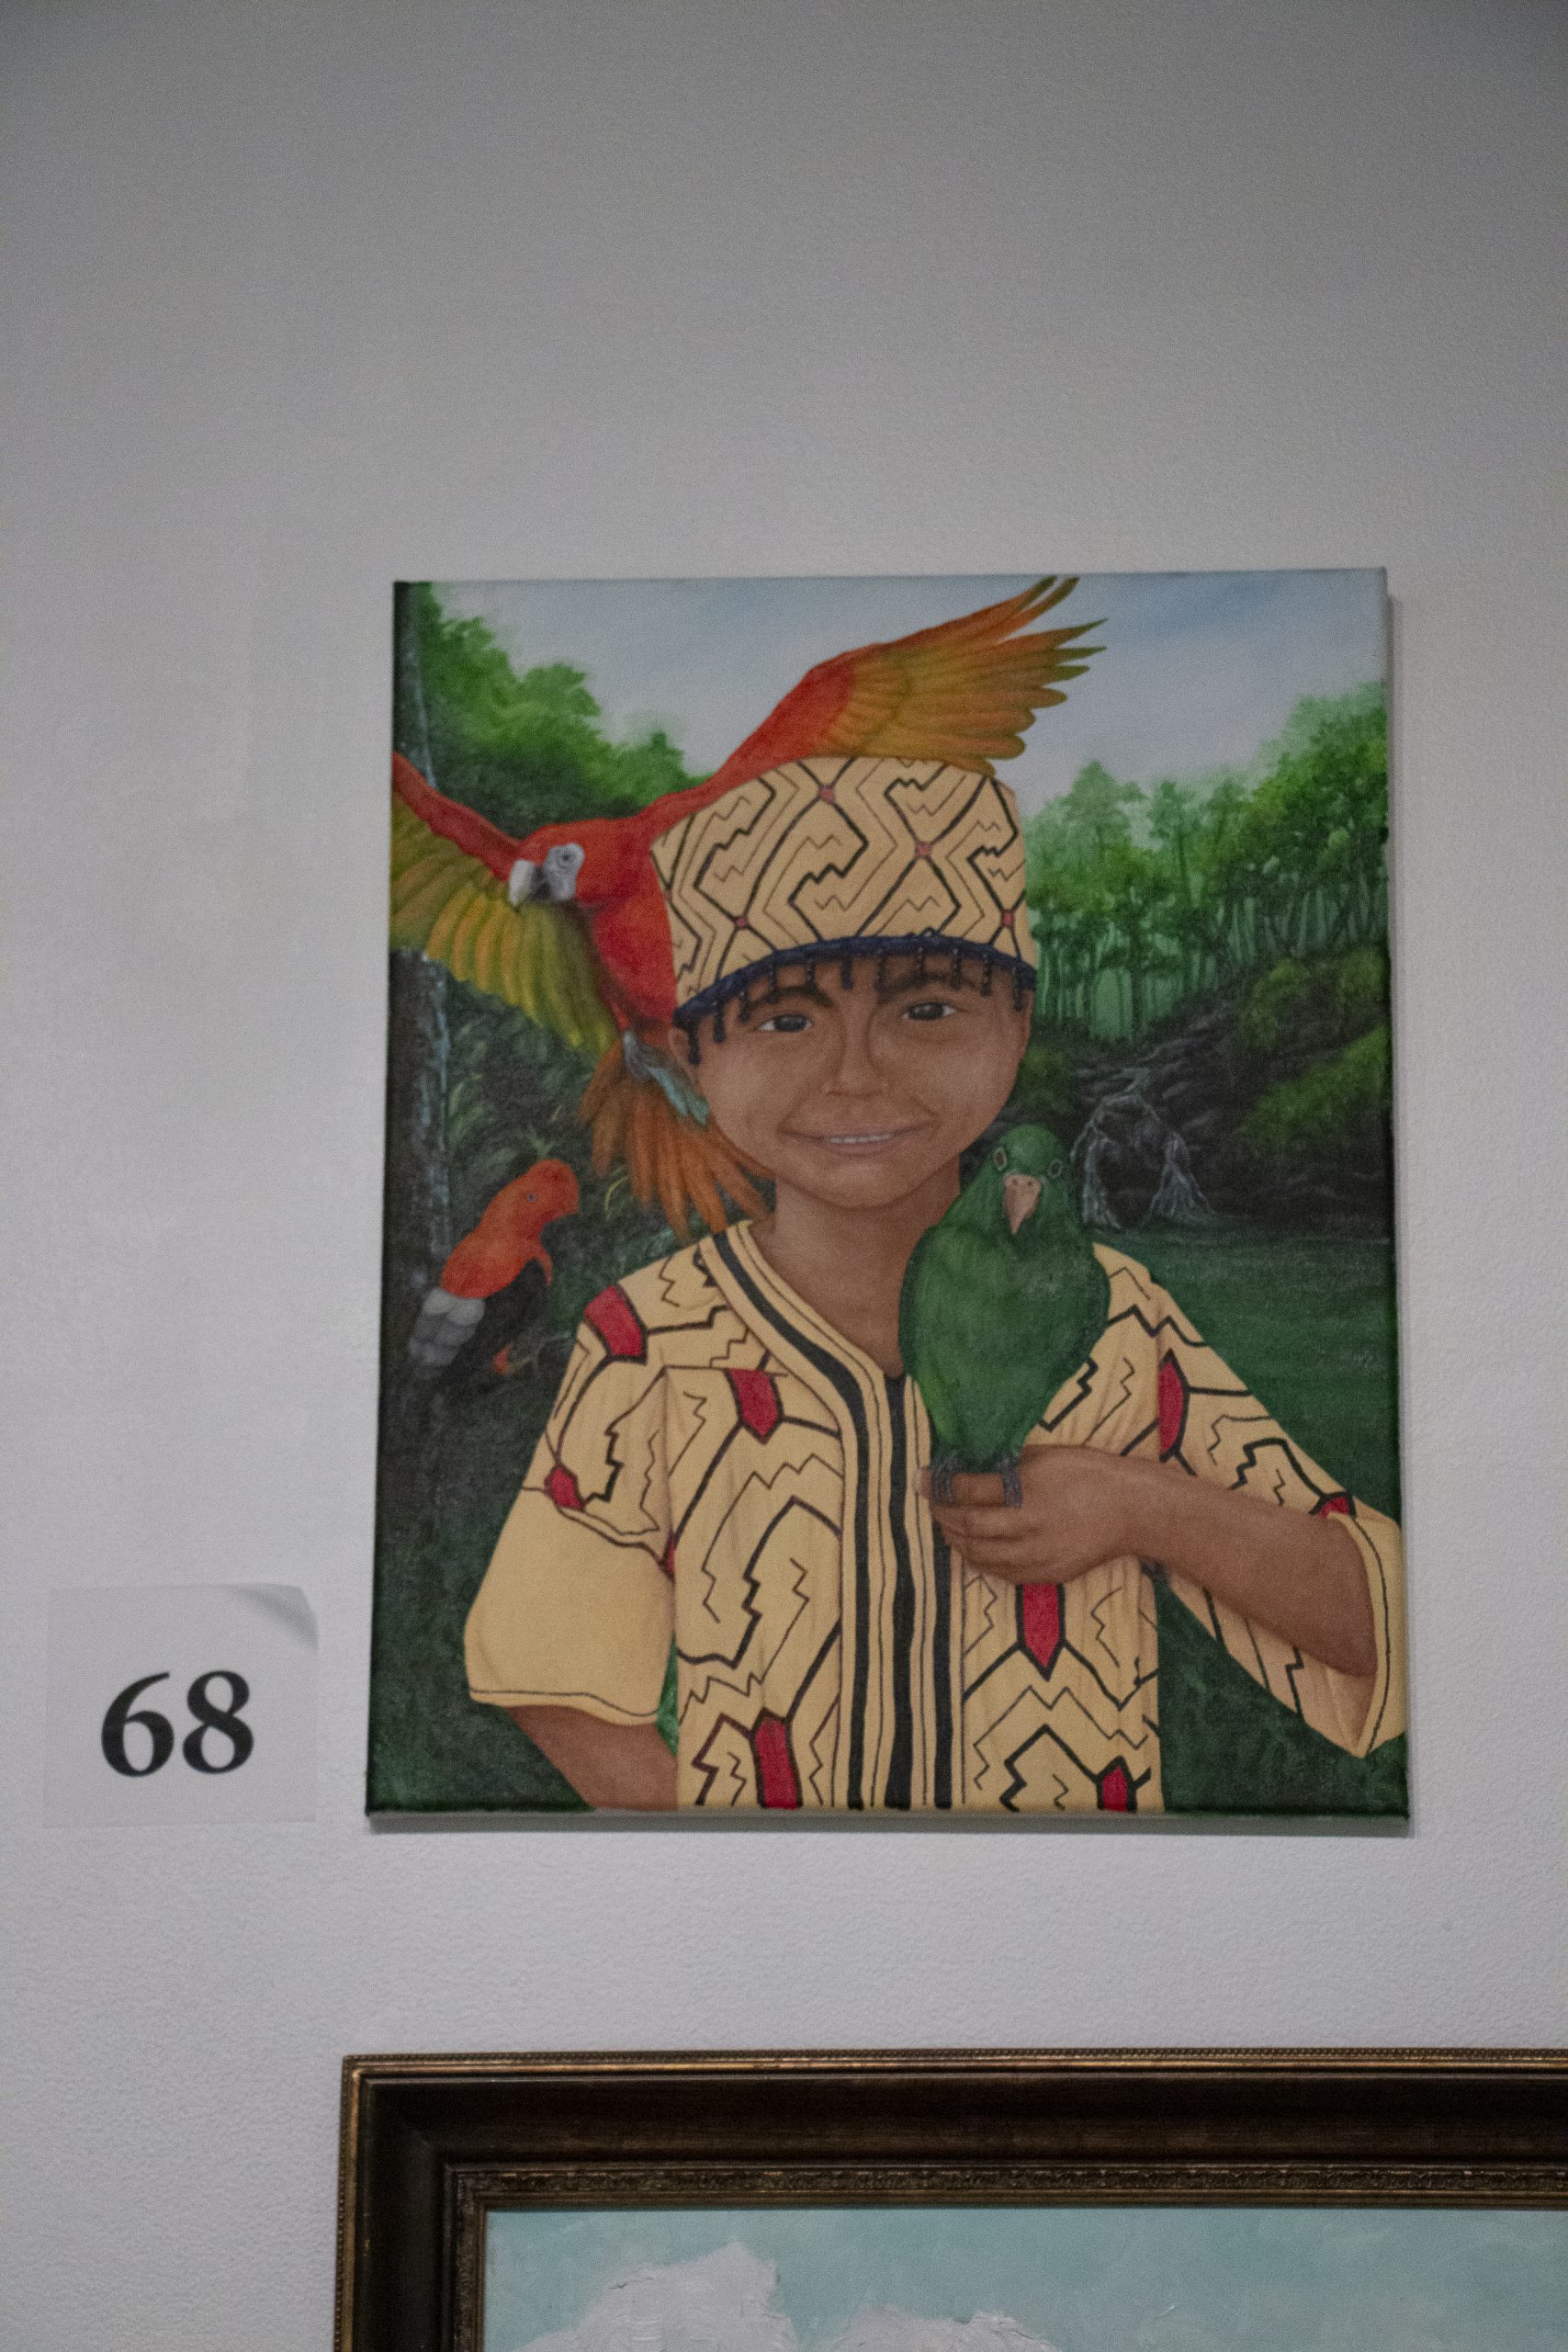 A small child is the central focus. They are wearing a yellow shirt and hat with red and green colorful designs on it. They hold a green parrot in their right hand and a red maccaw spreads its wings behind their right shoulder. The background is lush green forrest.